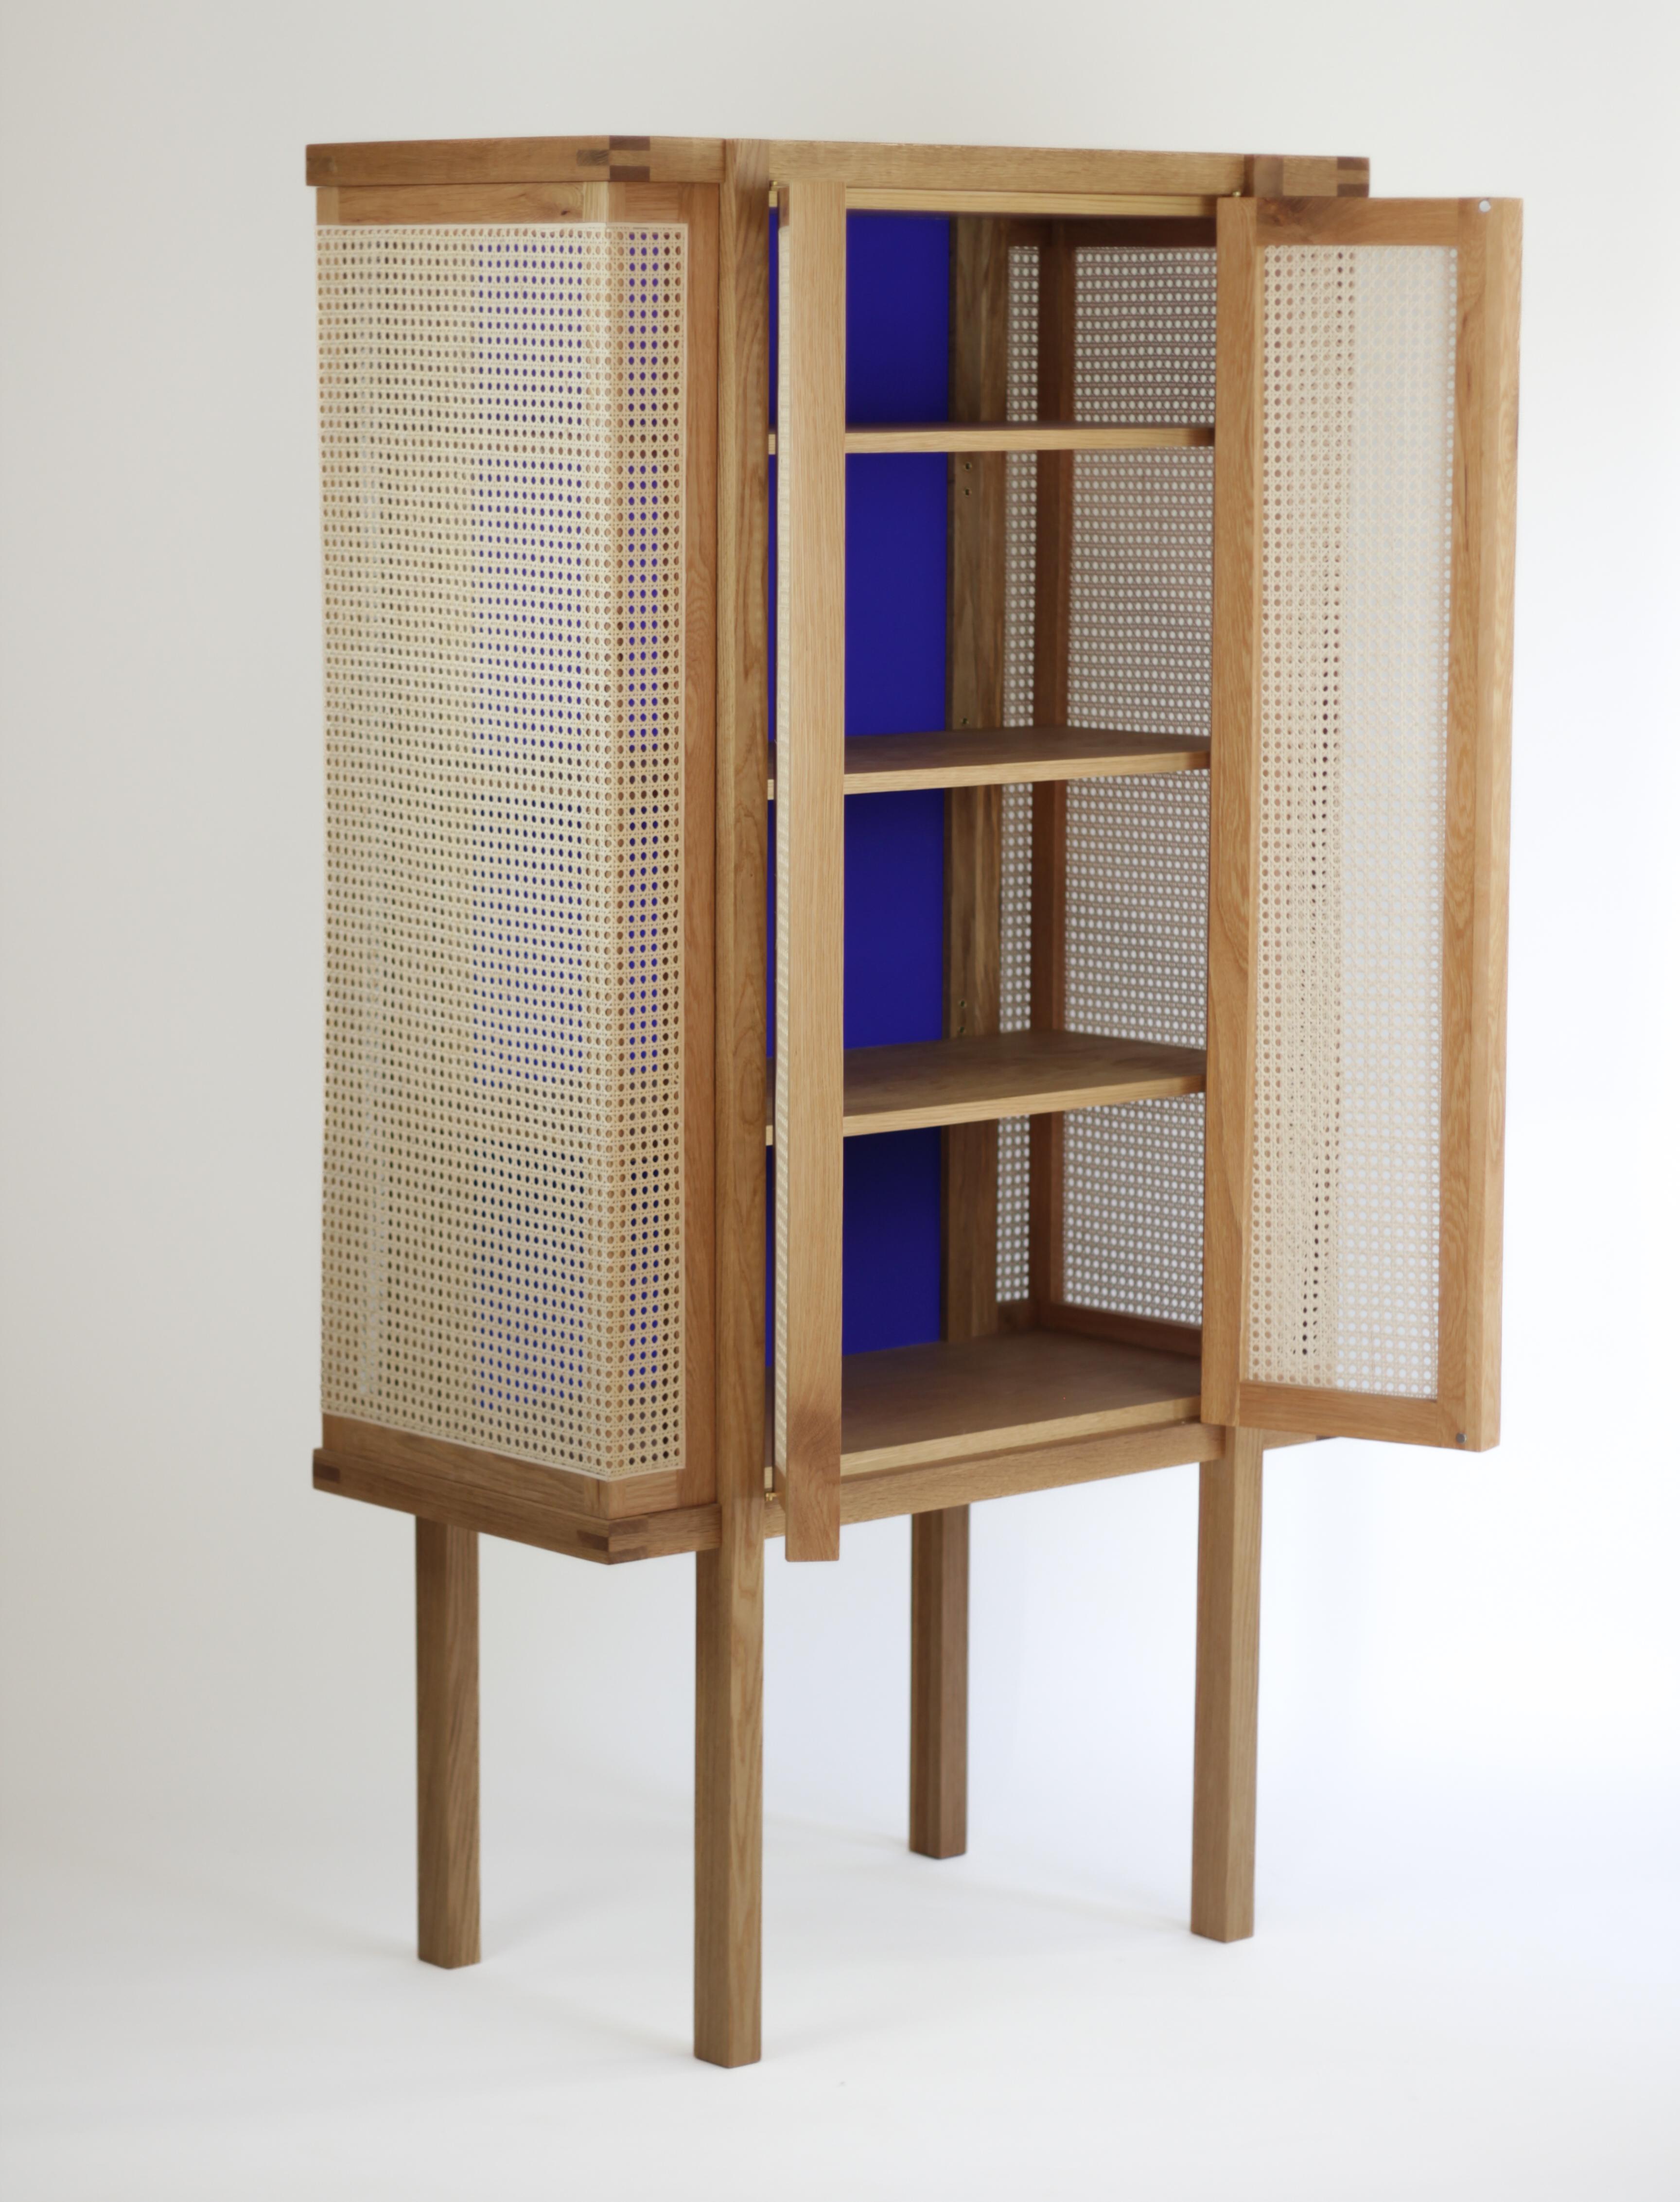 This Curiosity cabinet is superbly detailed as well as practical. It serves as a cabinet bar, pantry or linen closet. Offering ample room for storage with three adjustable shelves. It is constructed by hand with solid wood and caned rattan panels